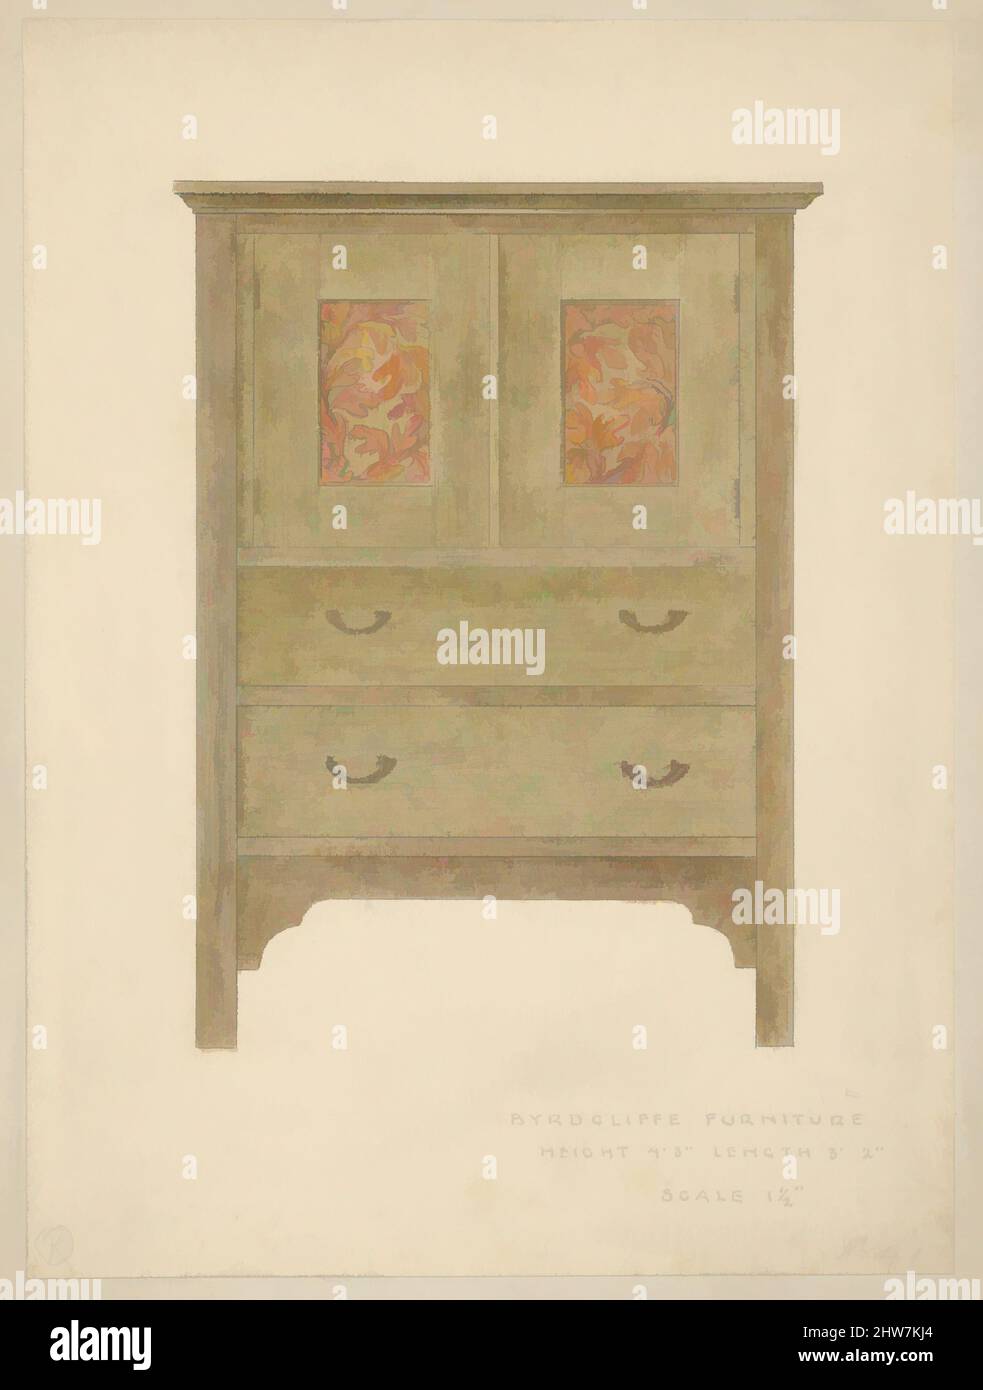 Art inspired by Sassafras Linen Press, 1904, Watercolor, colored pencil, and black ink, over graphite, sheet: 10 x 7 3/8 in. (25.4 x 18.8 cm), Byrdcliffe Arts and Crafts Colony (American, 1902–1915), attrib. to Ralph Radcliffe Whitehead (American (born England), Yorkshire 1854–1929, Classic works modernized by Artotop with a splash of modernity. Shapes, color and value, eye-catching visual impact on art. Emotions through freedom of artworks in a contemporary way. A timeless message pursuing a wildly creative new direction. Artists turning to the digital medium and creating the Artotop NFT Stock Photo